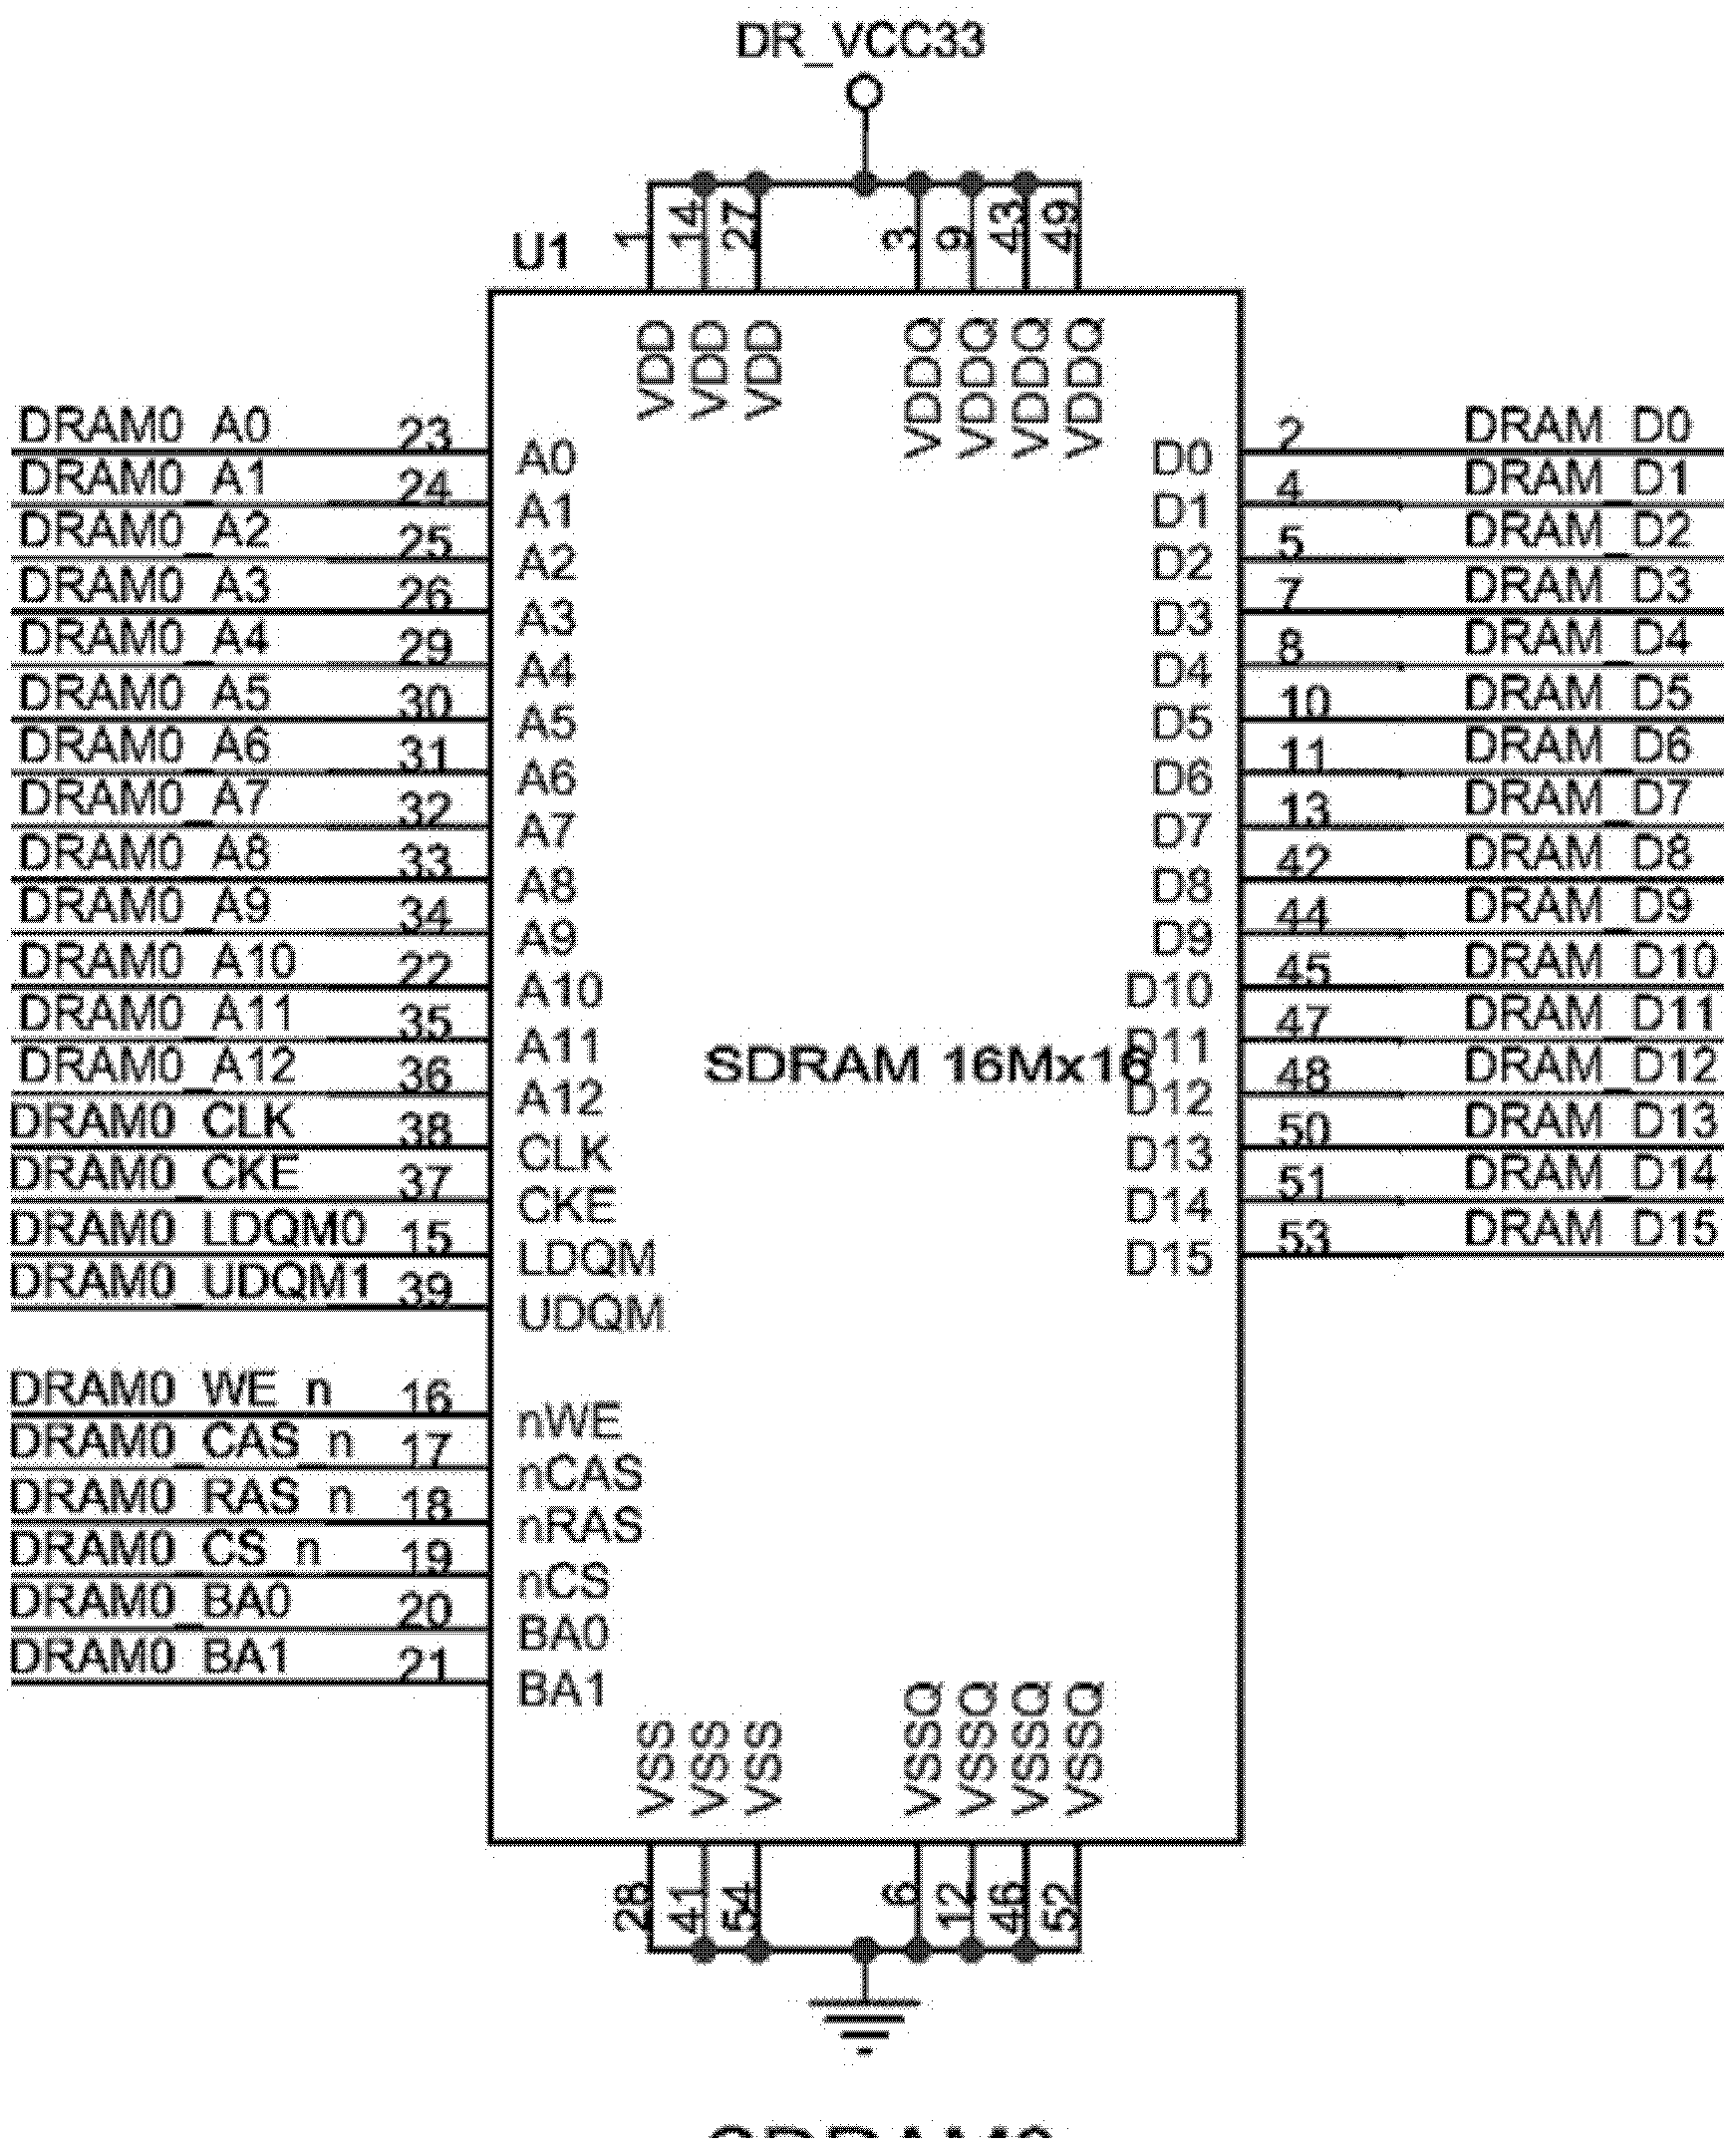 Field programmable gate array-based (FPGA-based) intrusion detection system and method